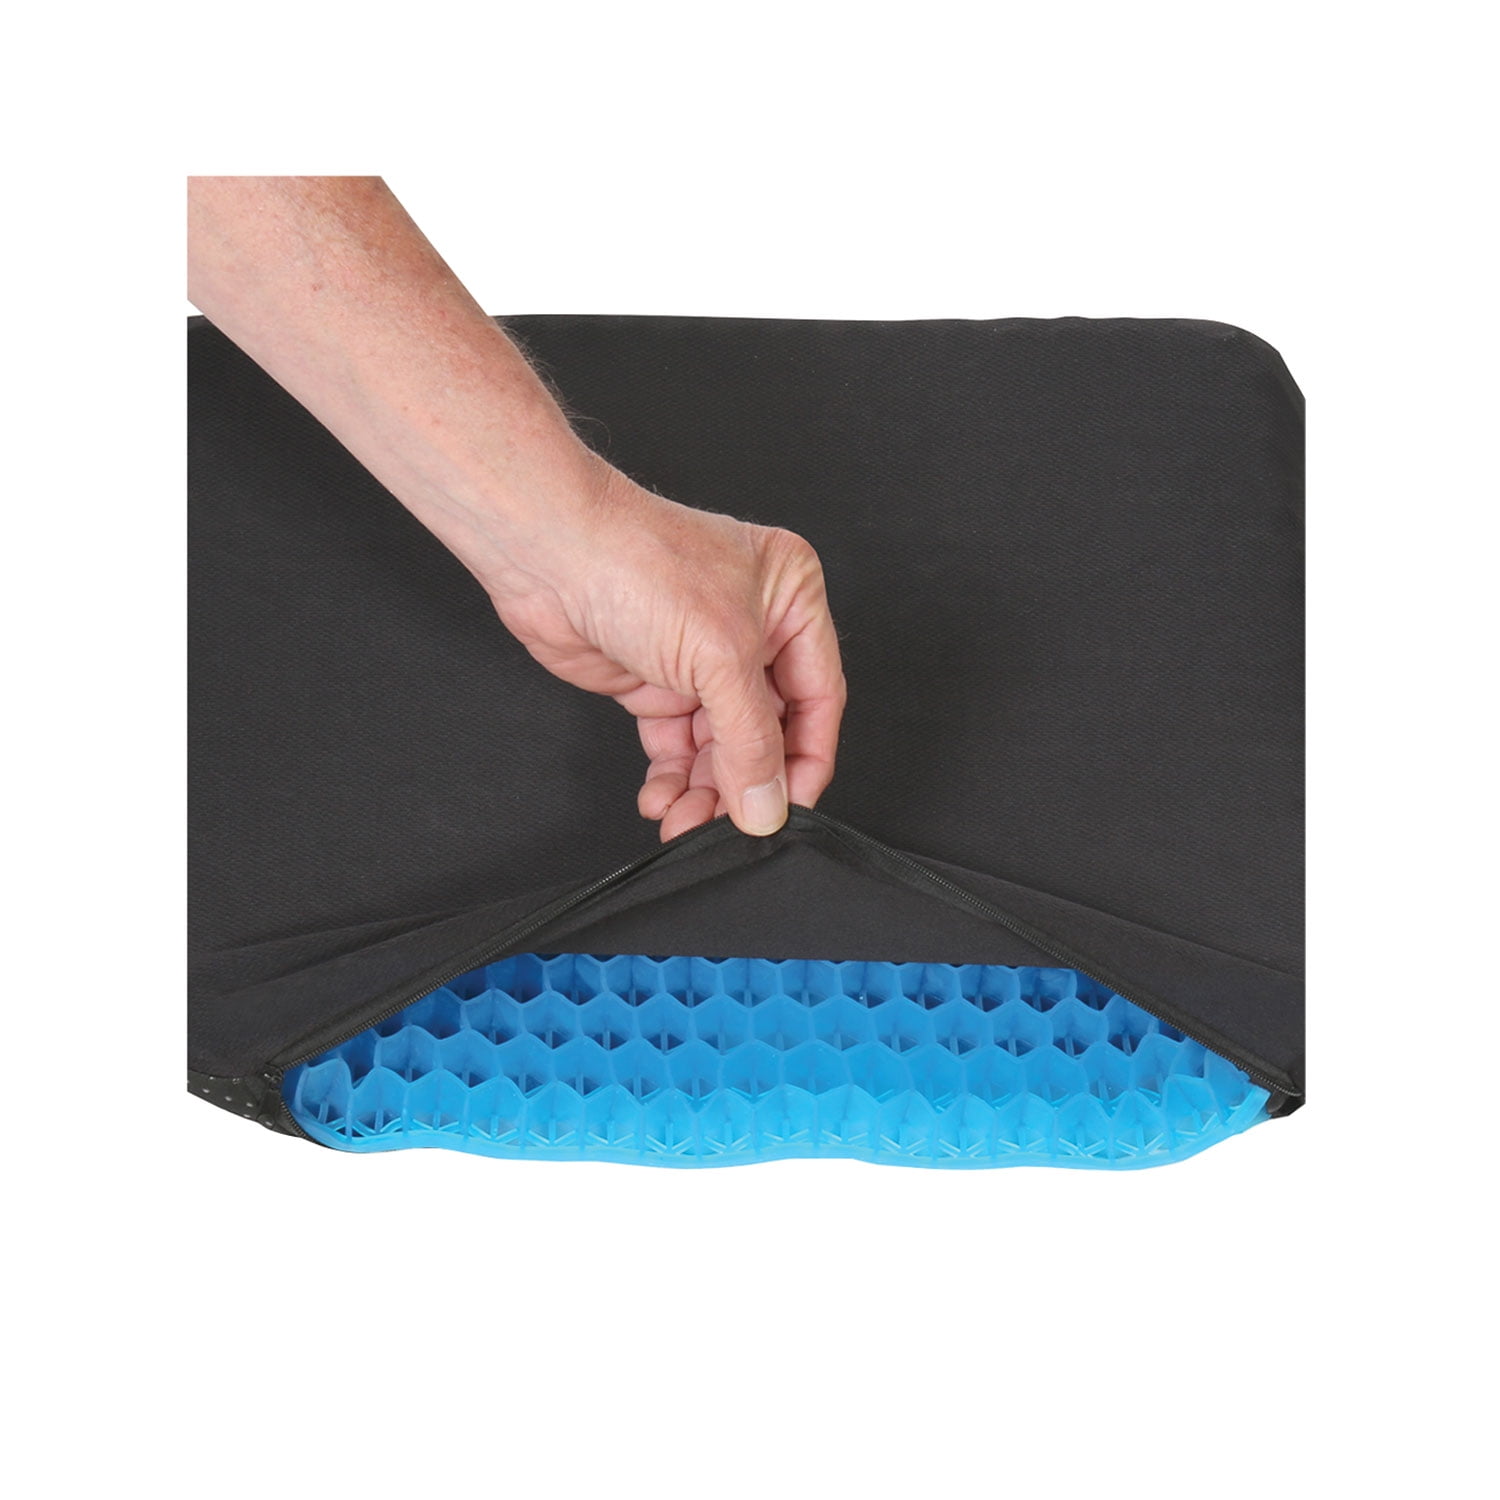 Gel Seat Cushion for Long Sitting Pressure Relief (Super Large & Thick) -  Non-Slip Gel Chair Cushion for Back,Sciatica,Tailbone Pain Relief - Seat